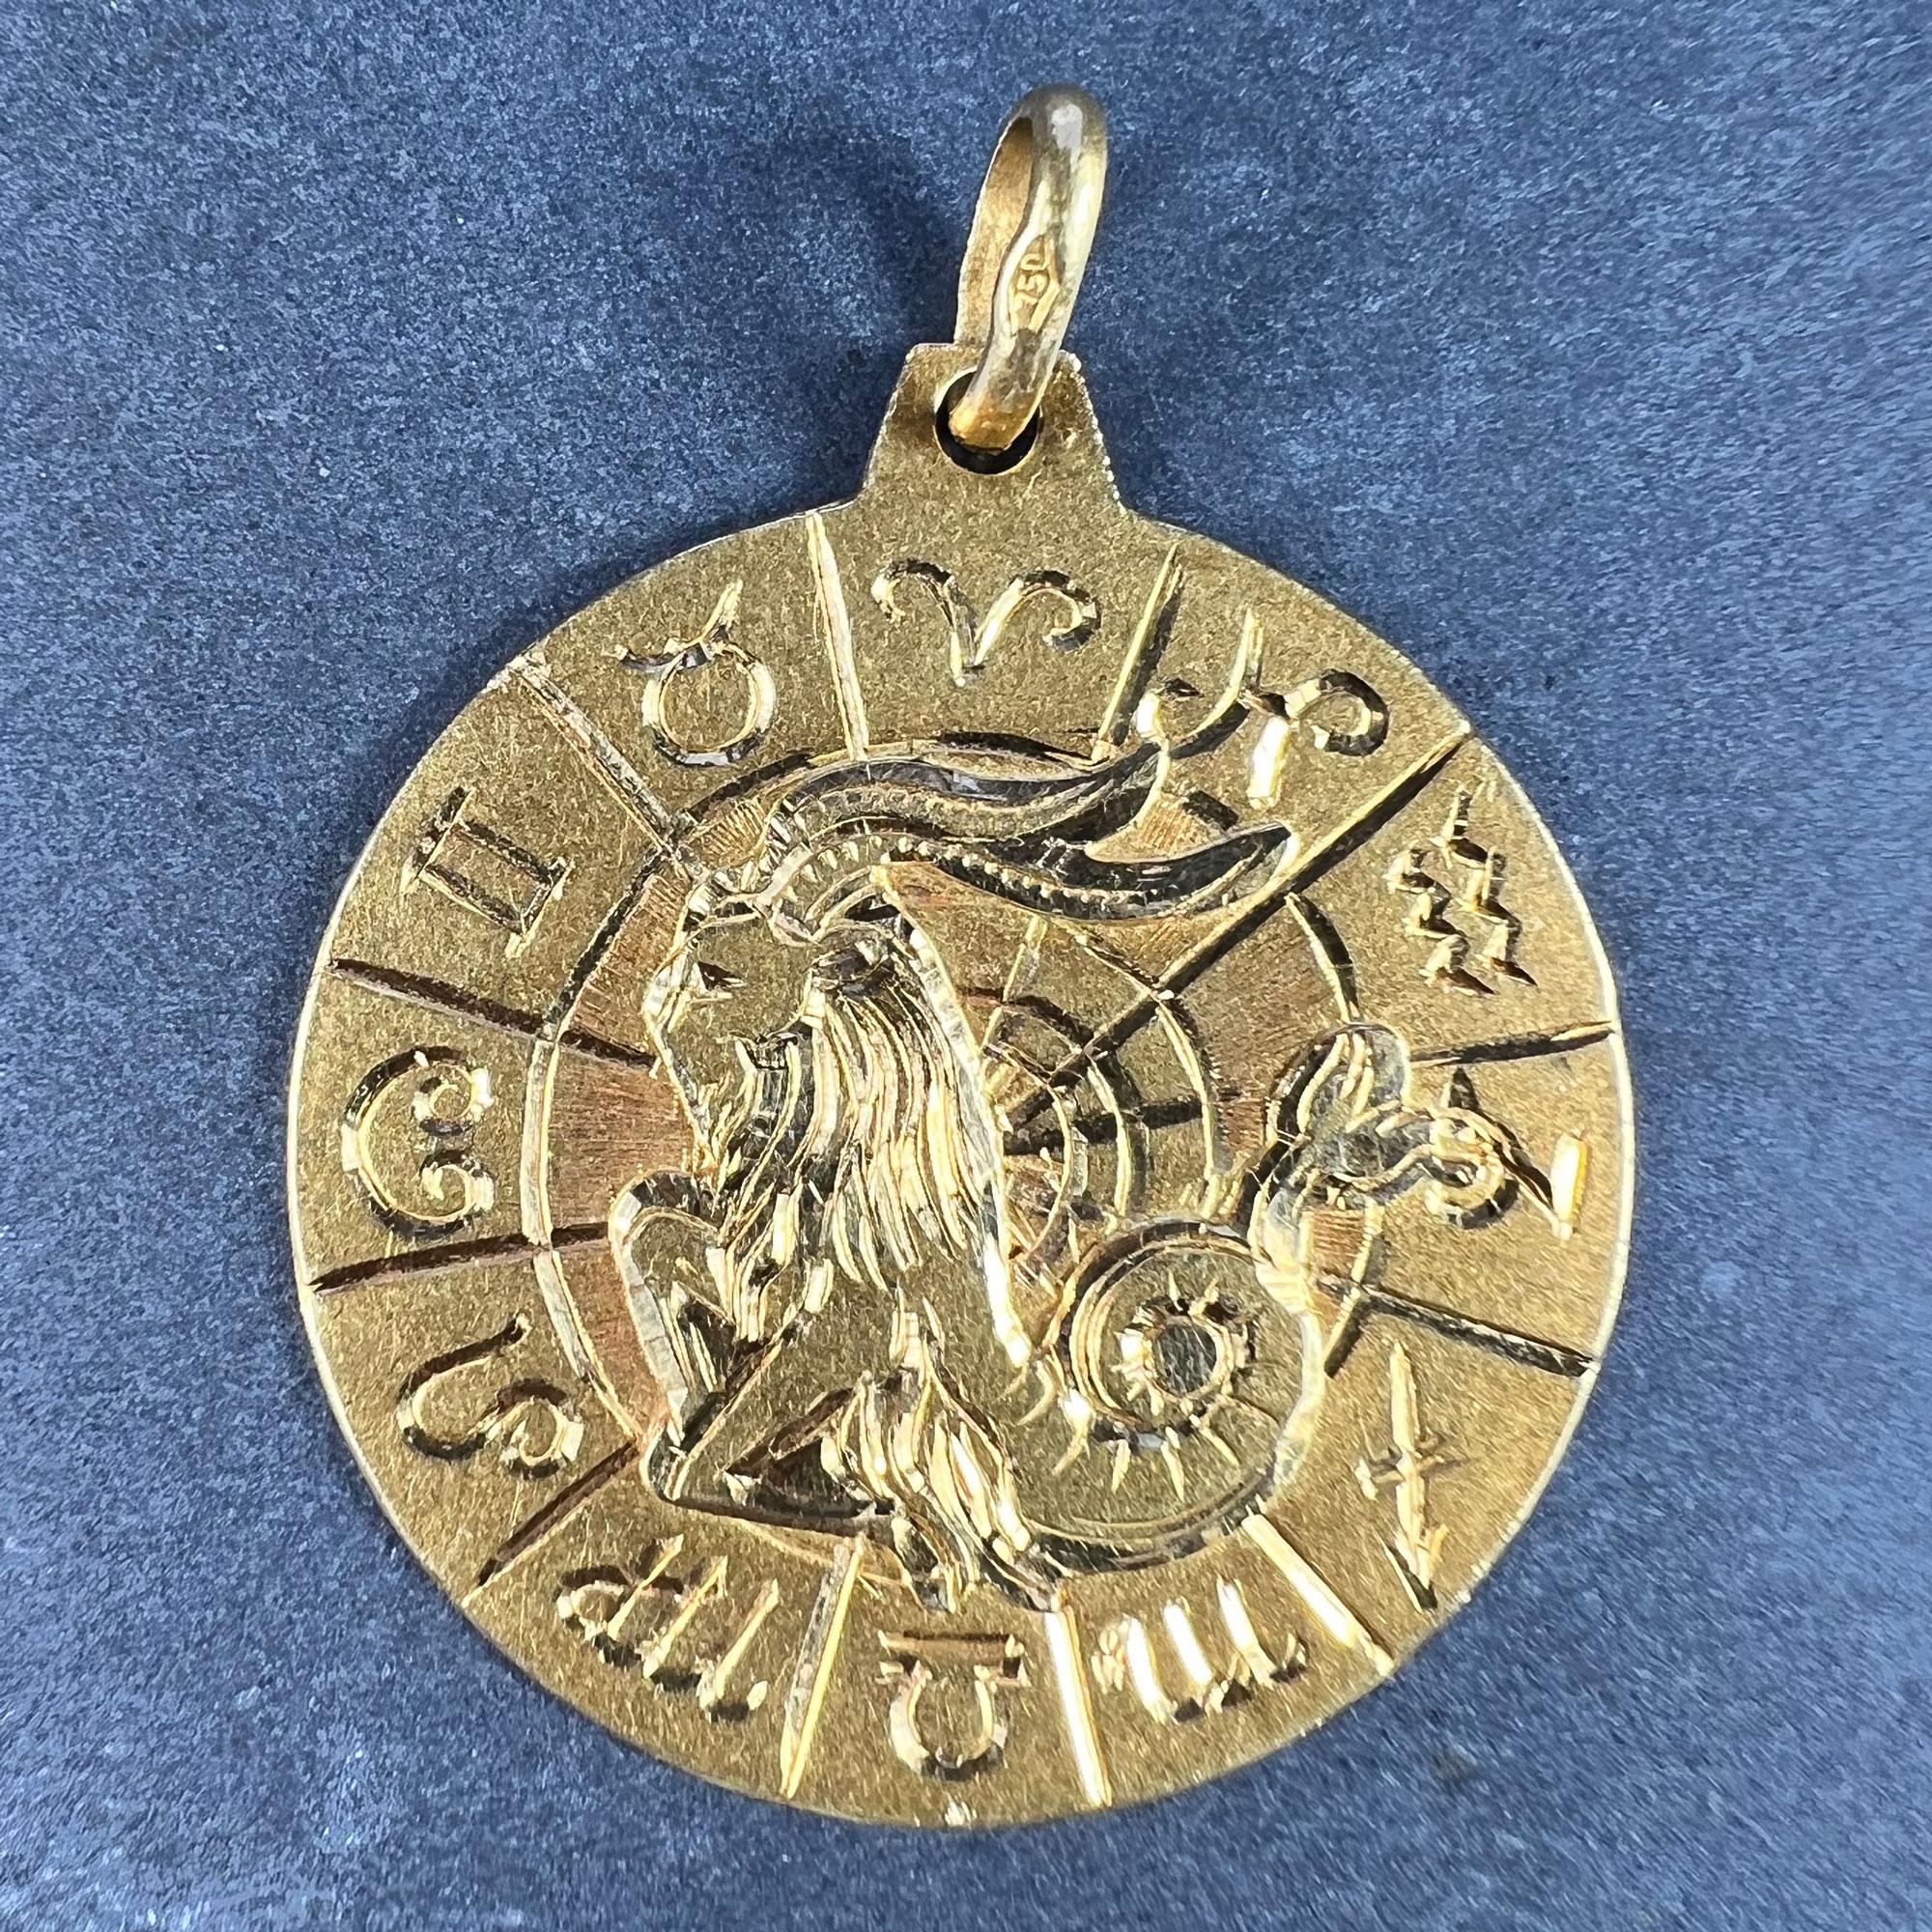 An 18 karat (18K) yellow gold charm pendant designed as a circular medal of the Zodiac starsign for Capricorn, surrounded by a frame depicting the symbols of the other Zodiac starsigns. Stamped with the owl mark for 18 karat gold and French import